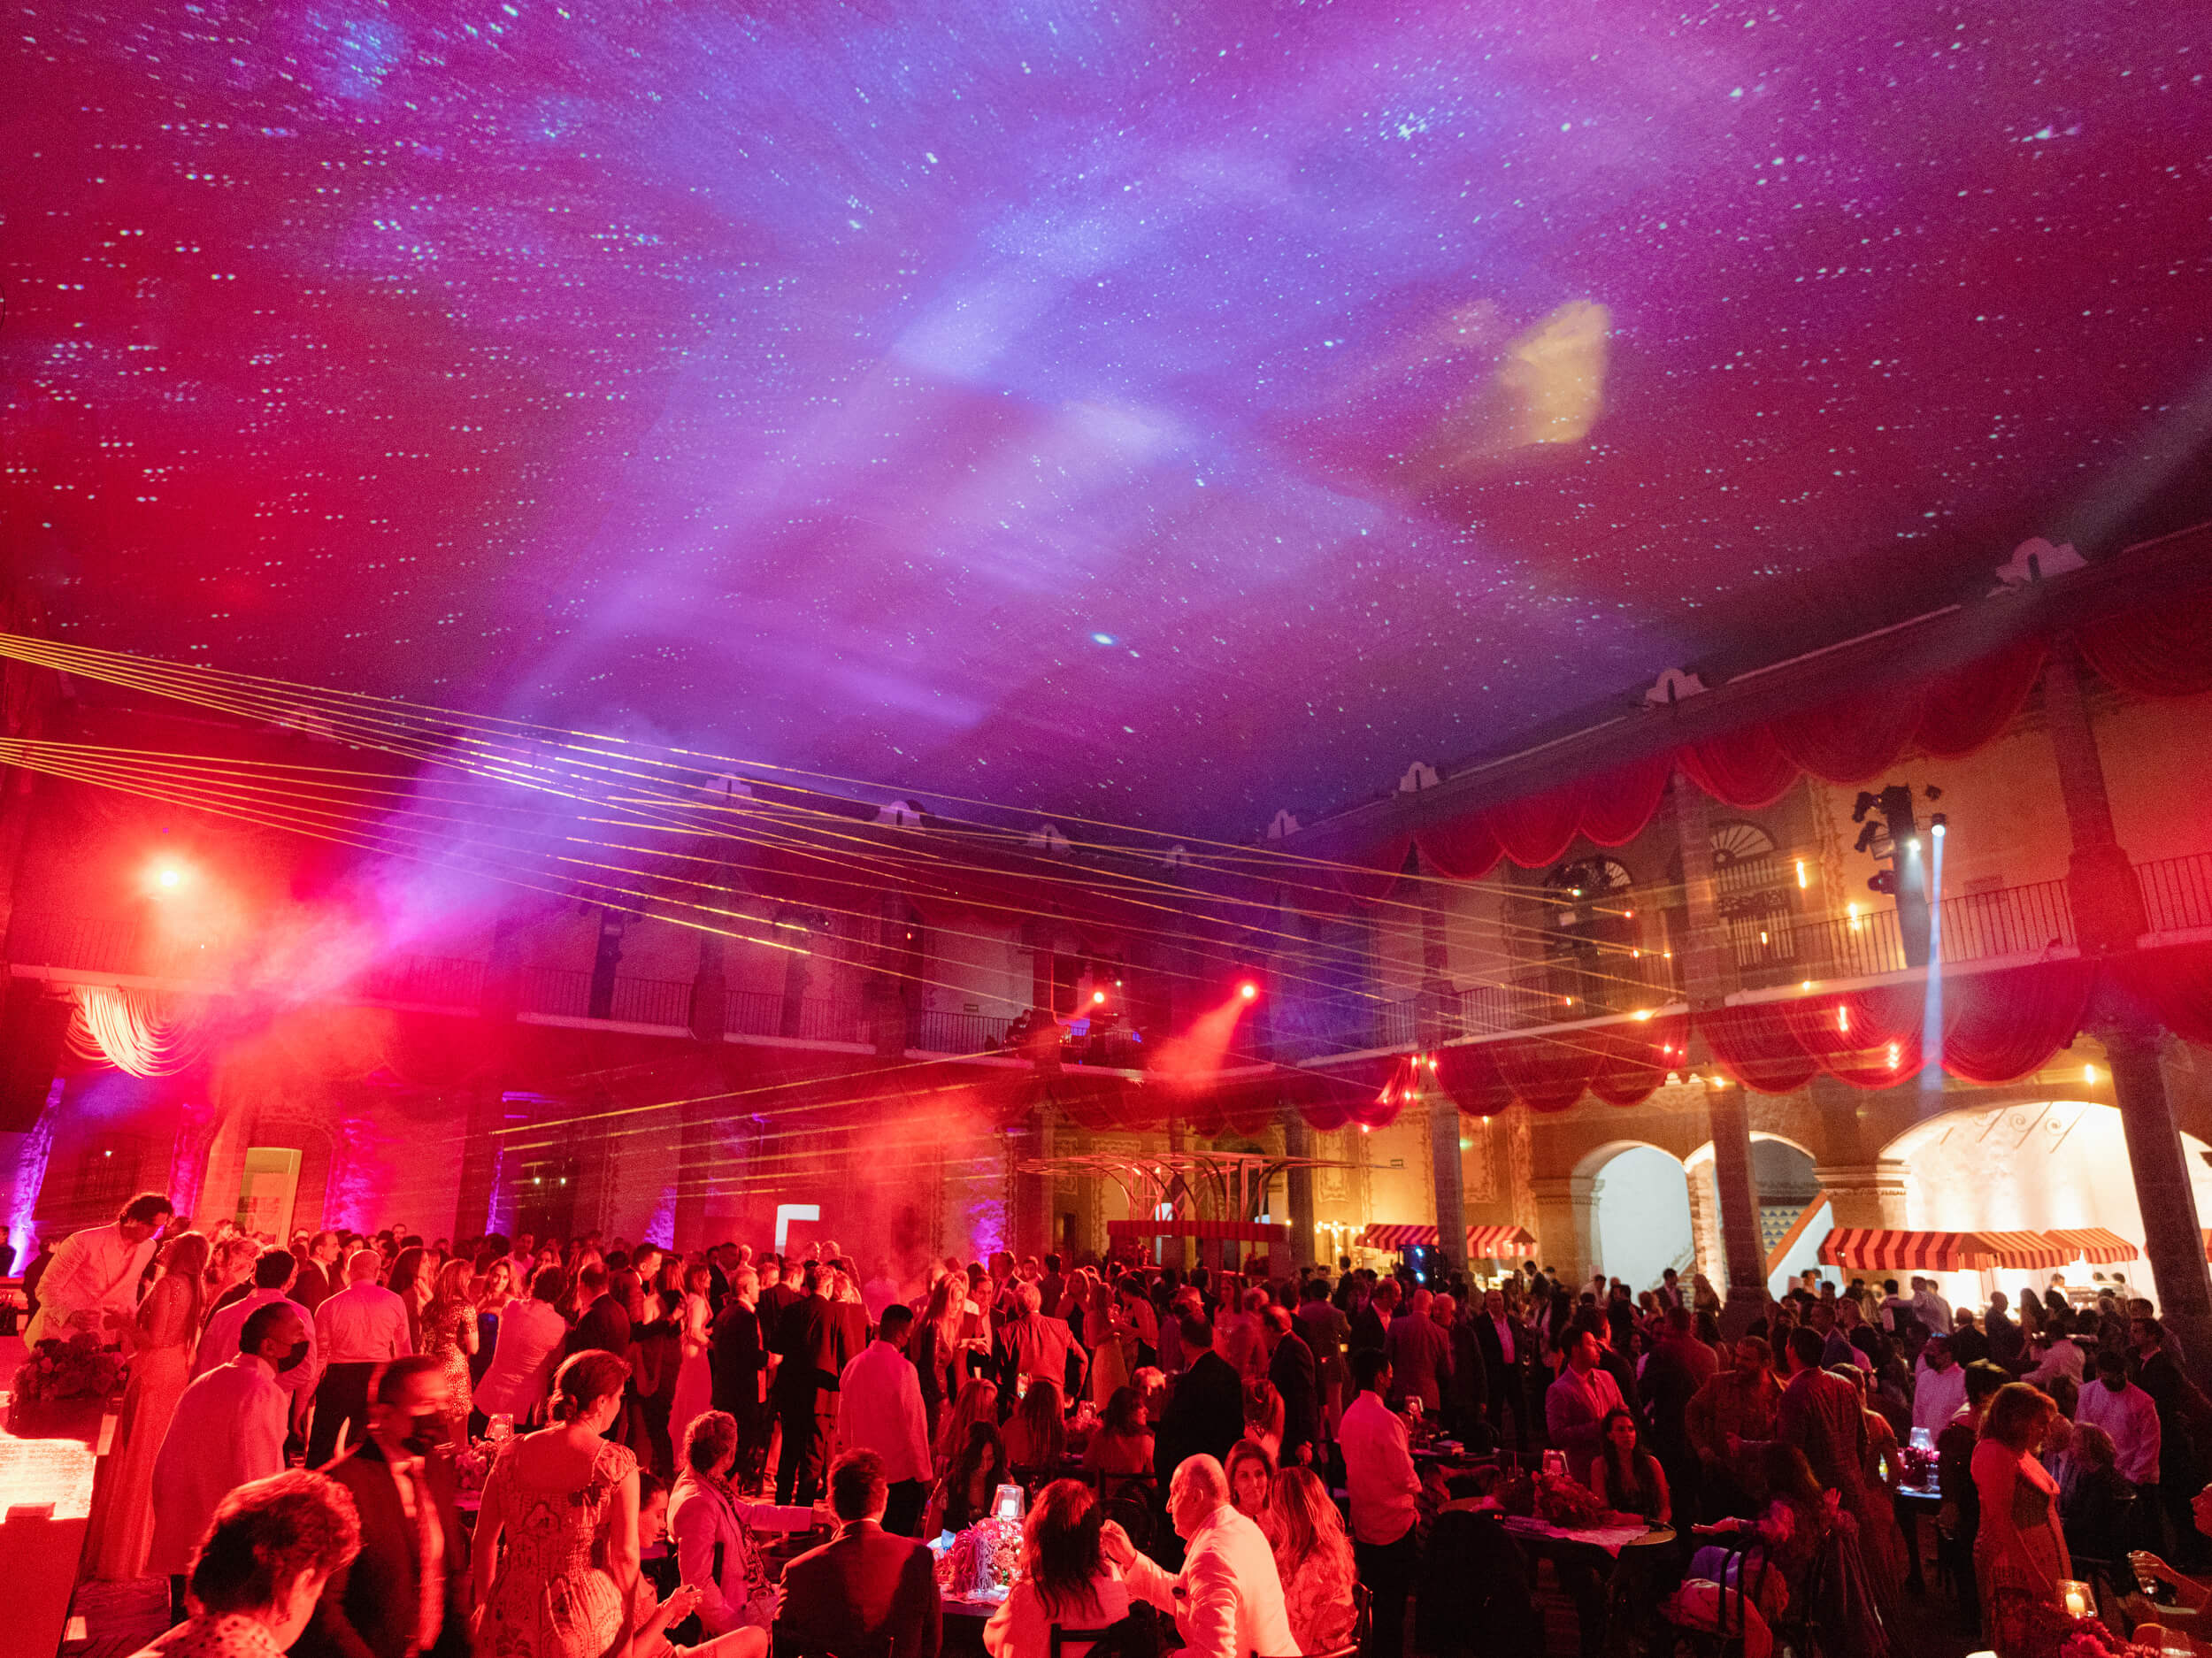 Guests celebrating under colorful lights and lasers